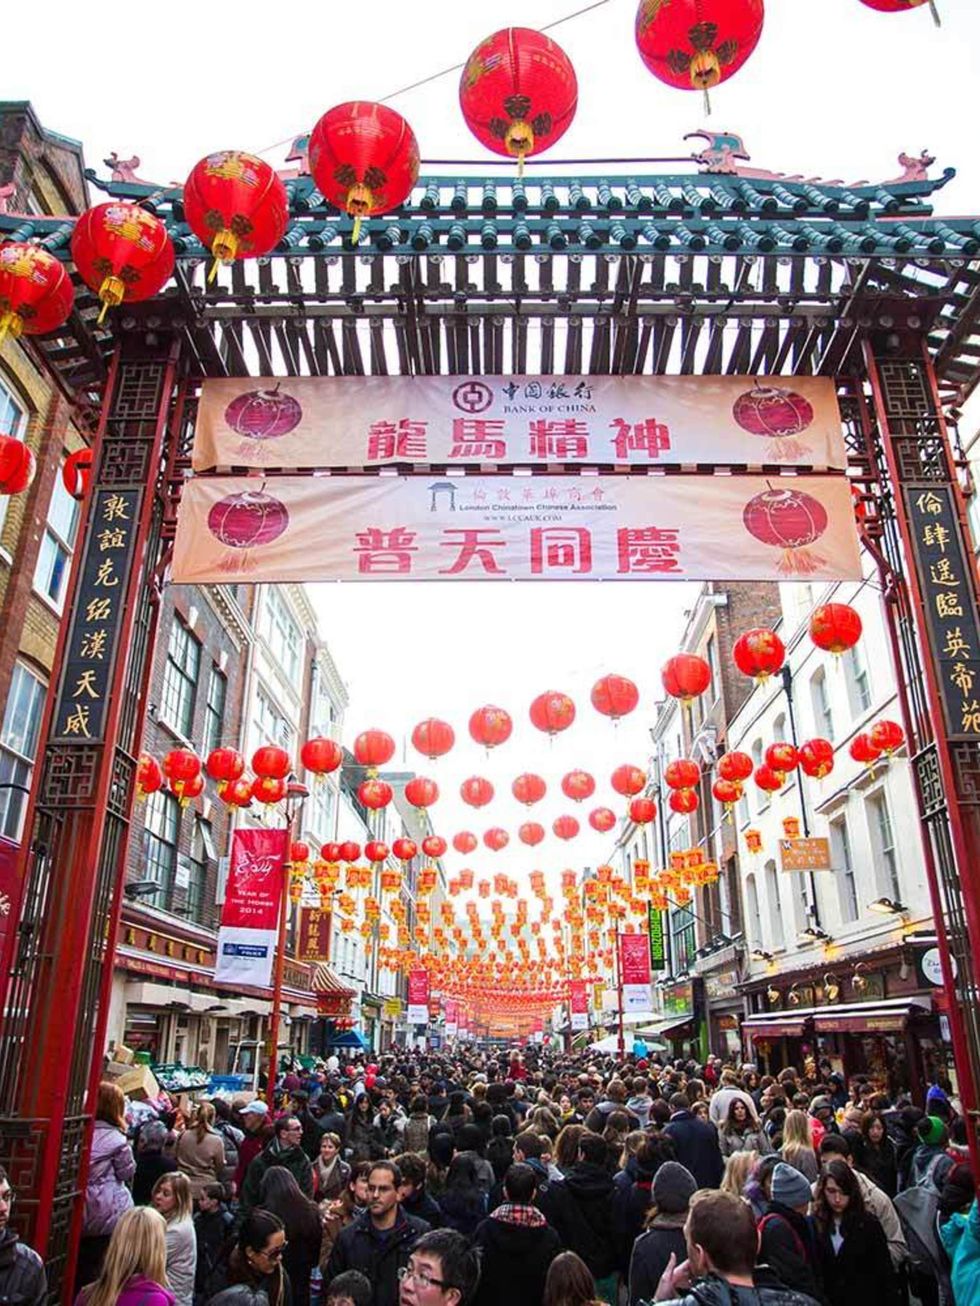 <p><strong>DAY OUT: Chinese New Year Parade </strong></p>

<p>London will play host to one the biggest celebrations of Chinese New Year outside of the Far Eastern land as it welcomes the Year of the Sheep; a symbol of peace and harmonious co-existence.</p